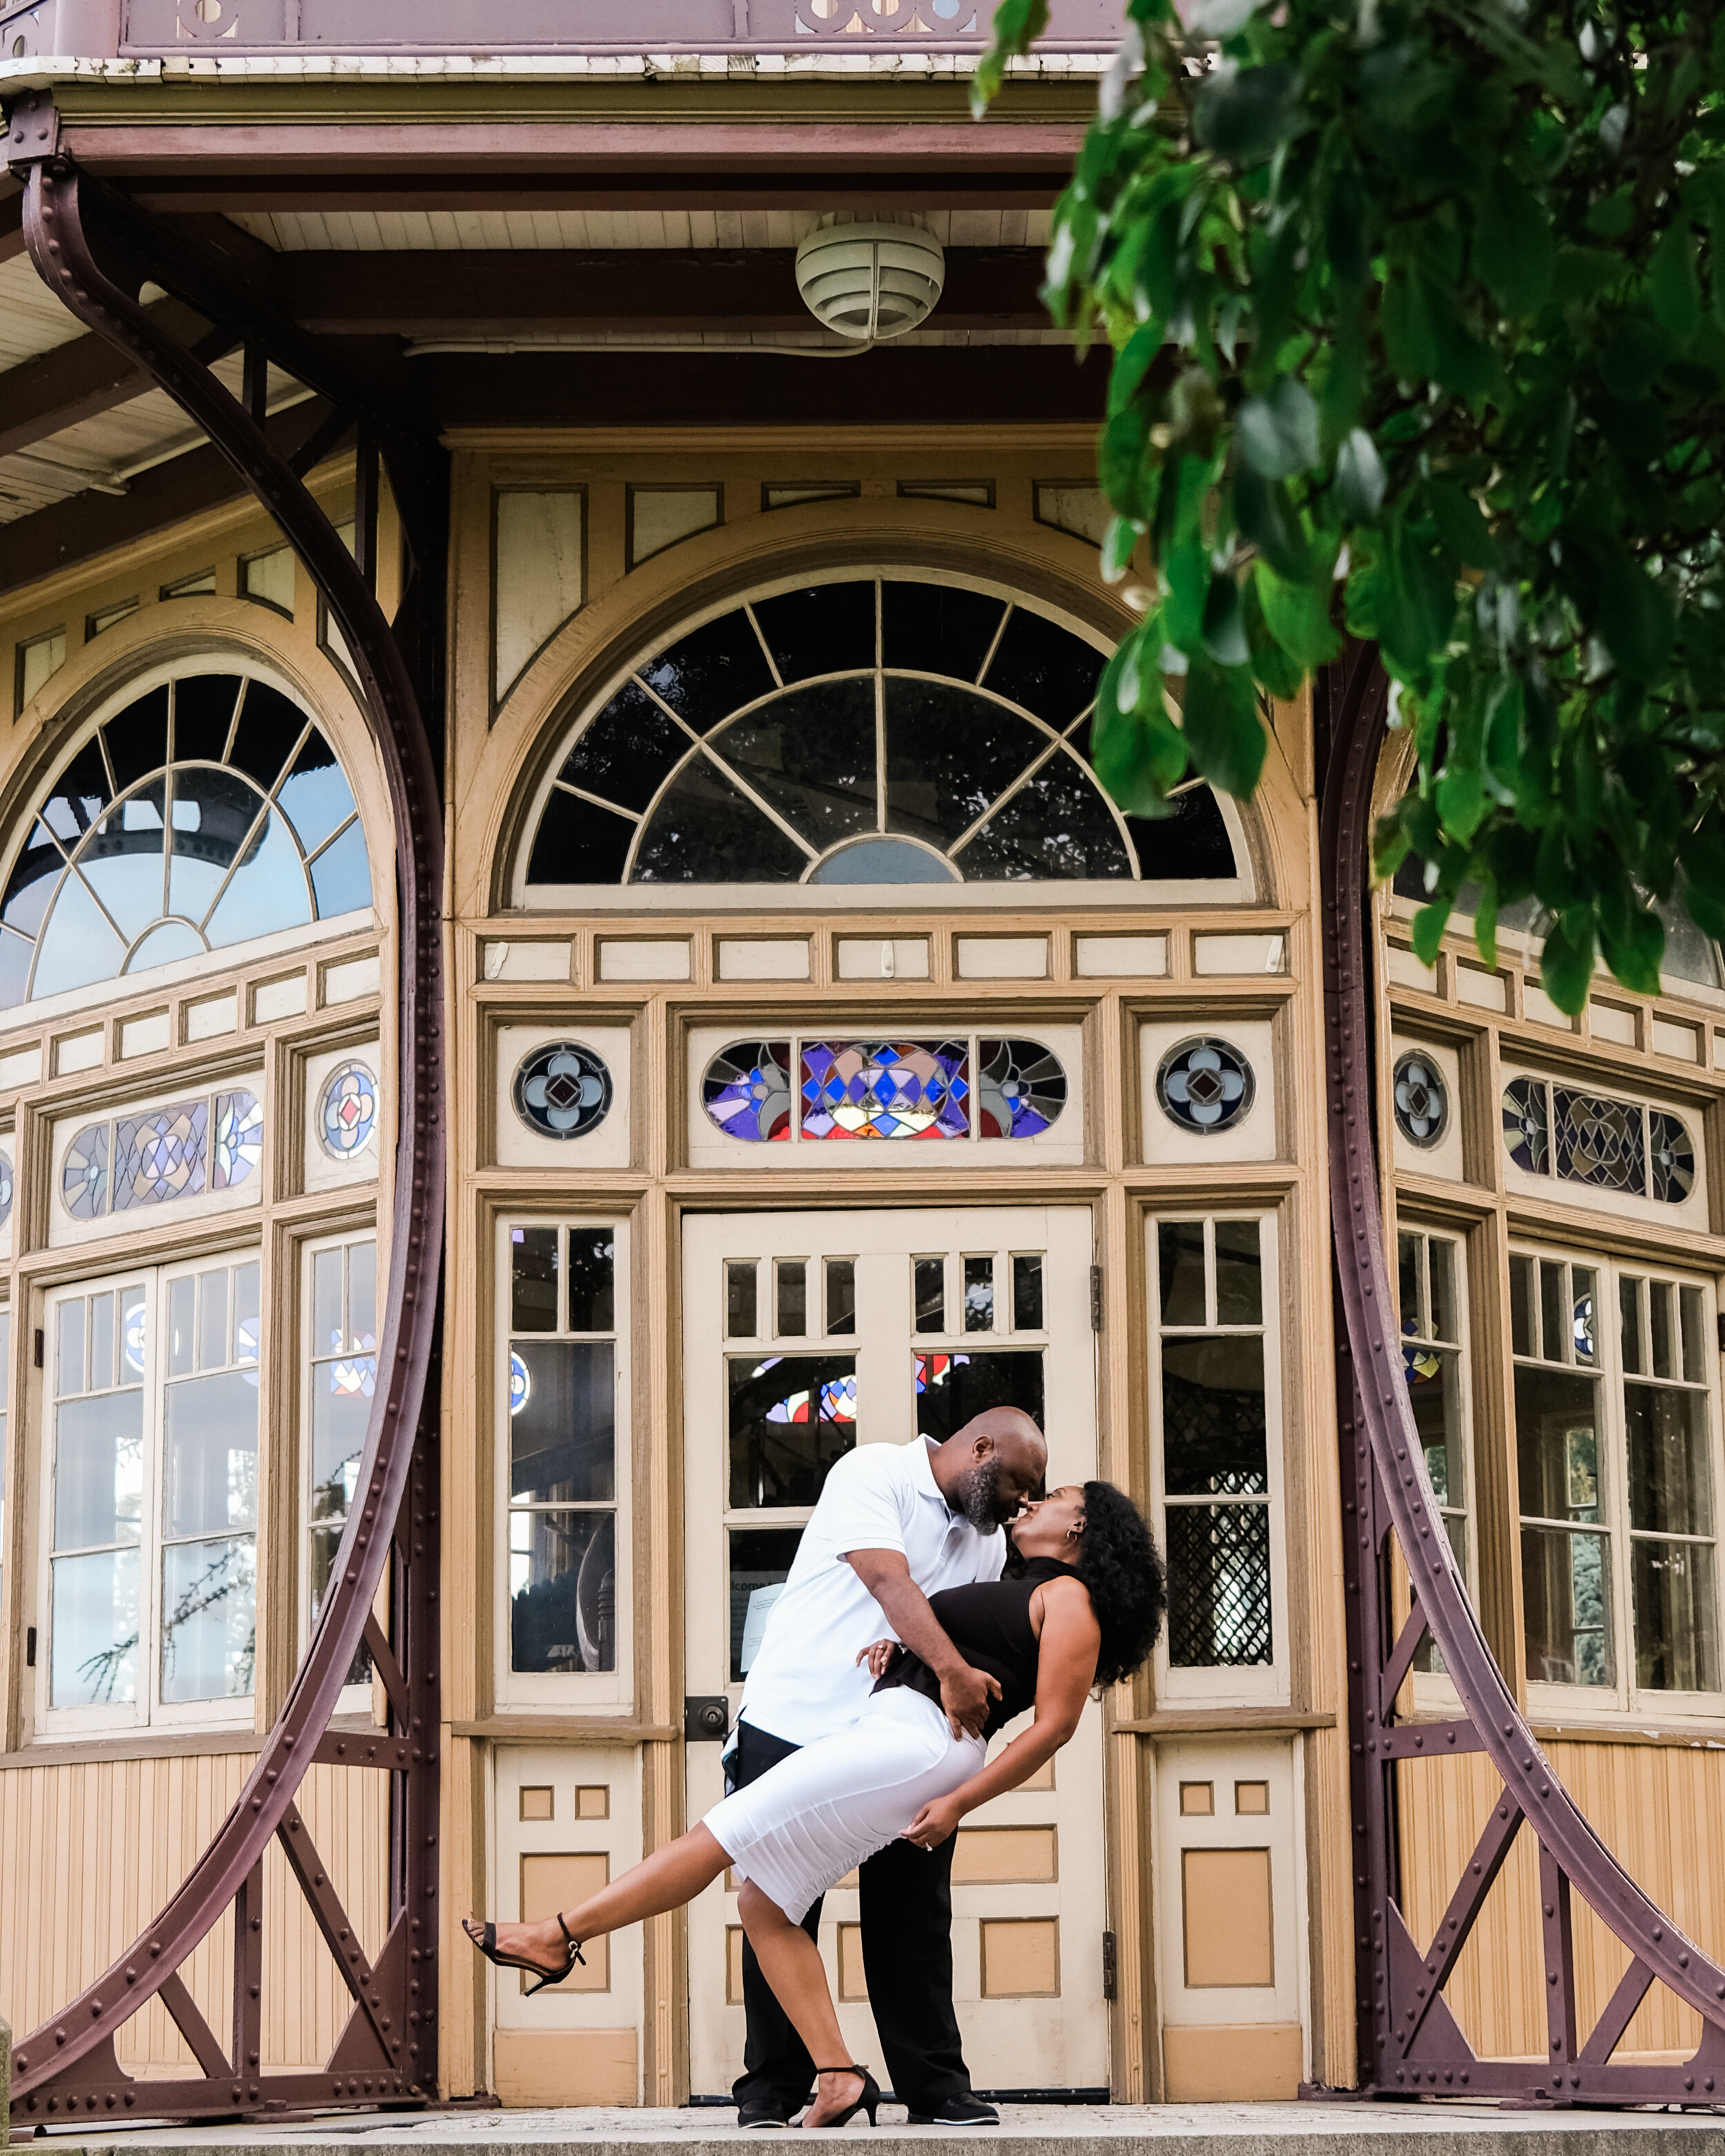 Patterson Park Engagement Session with Black Photographers Megapixels media in Baltimore Maryland (32 of 32).jpg